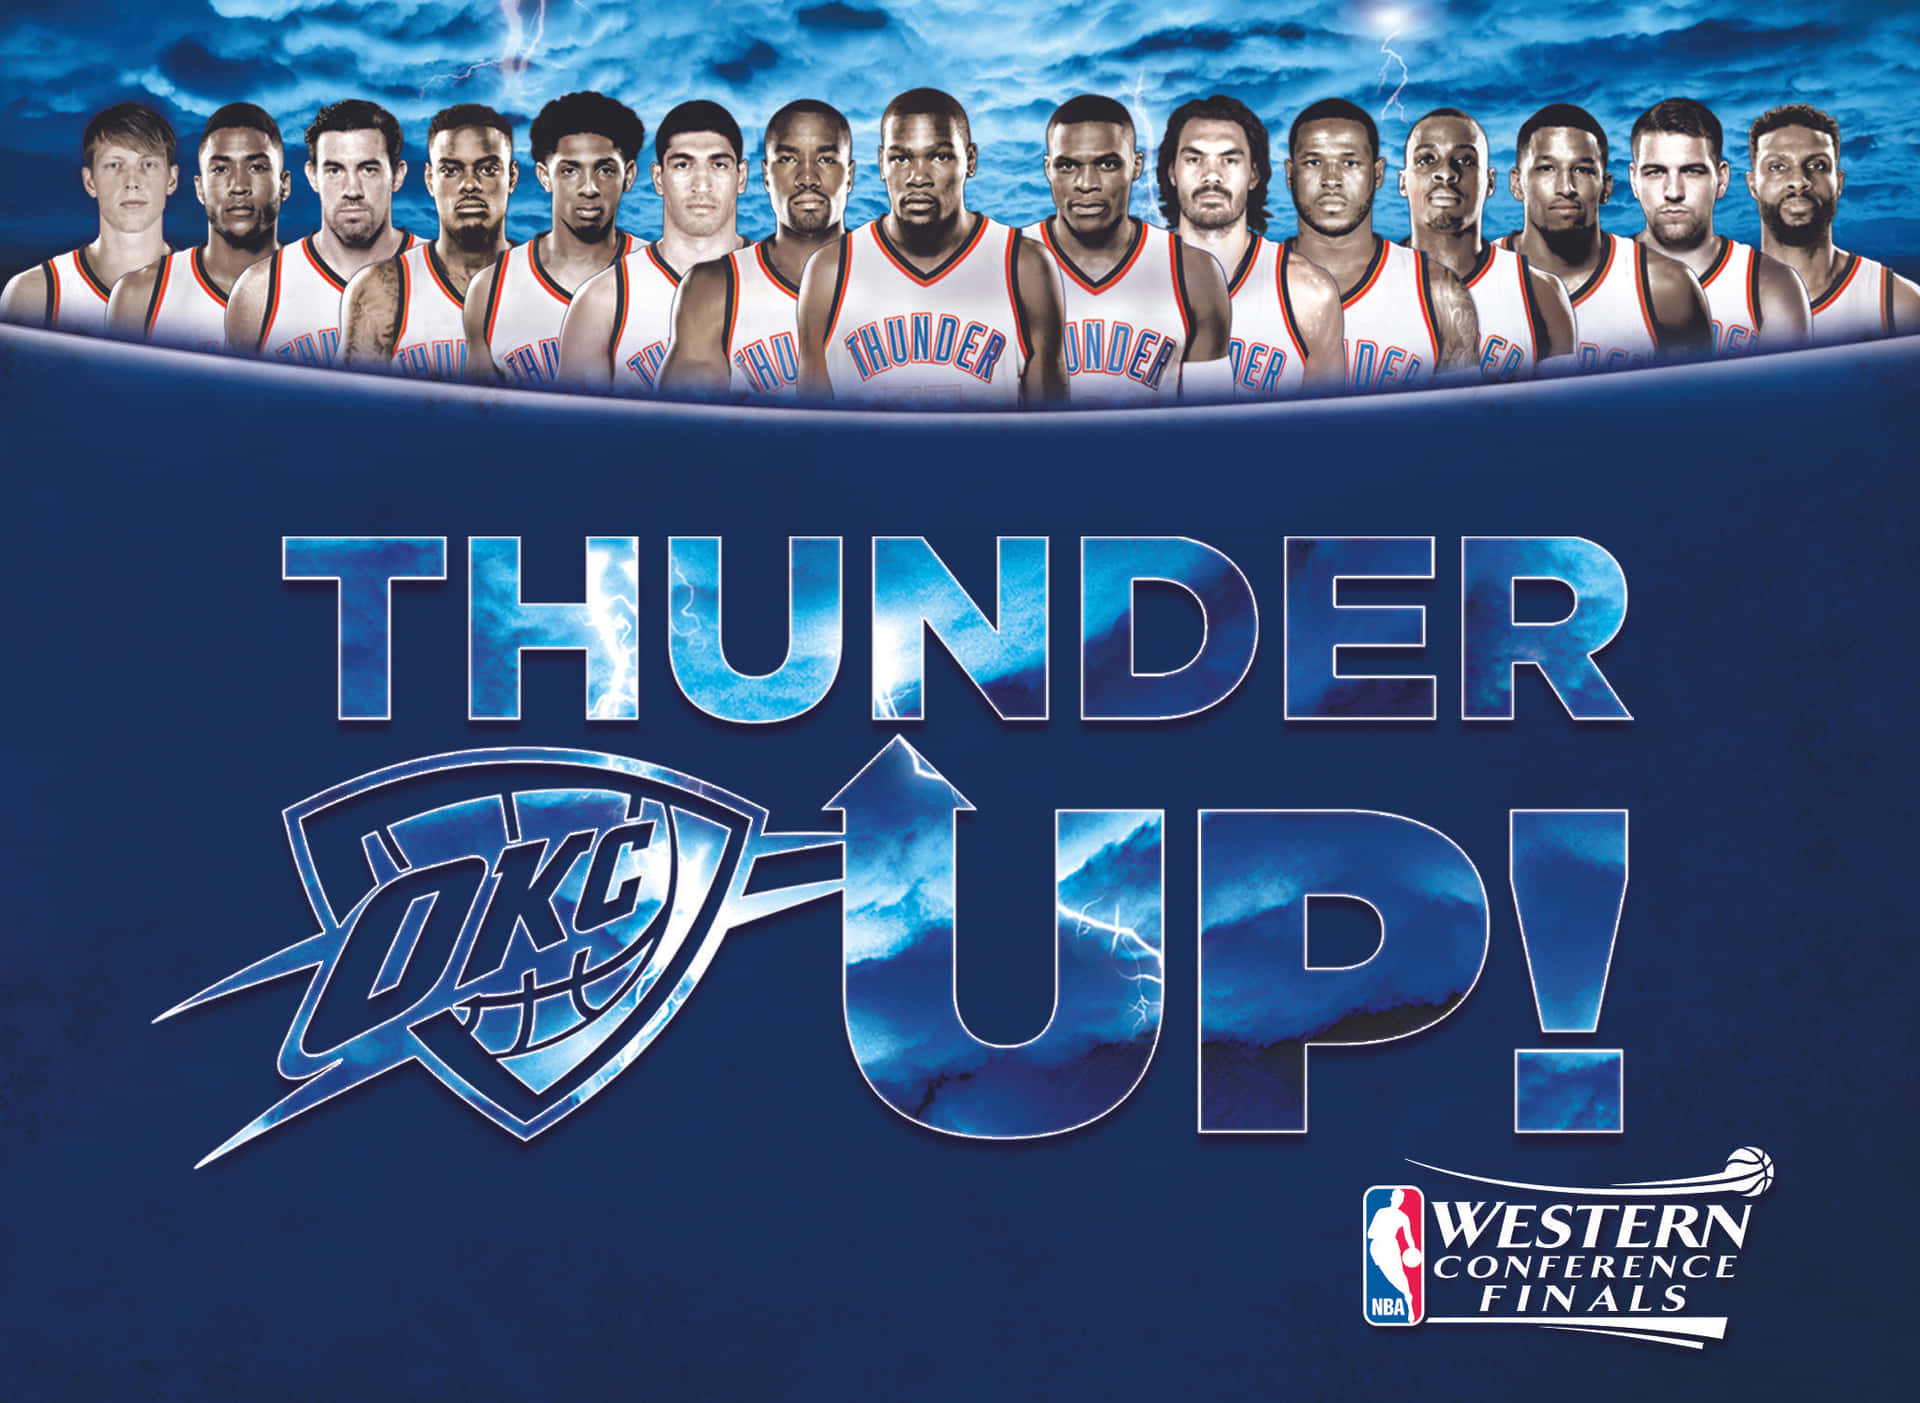 Oklahoma City Thunders 2012 Western Conference Finals Wallpaper